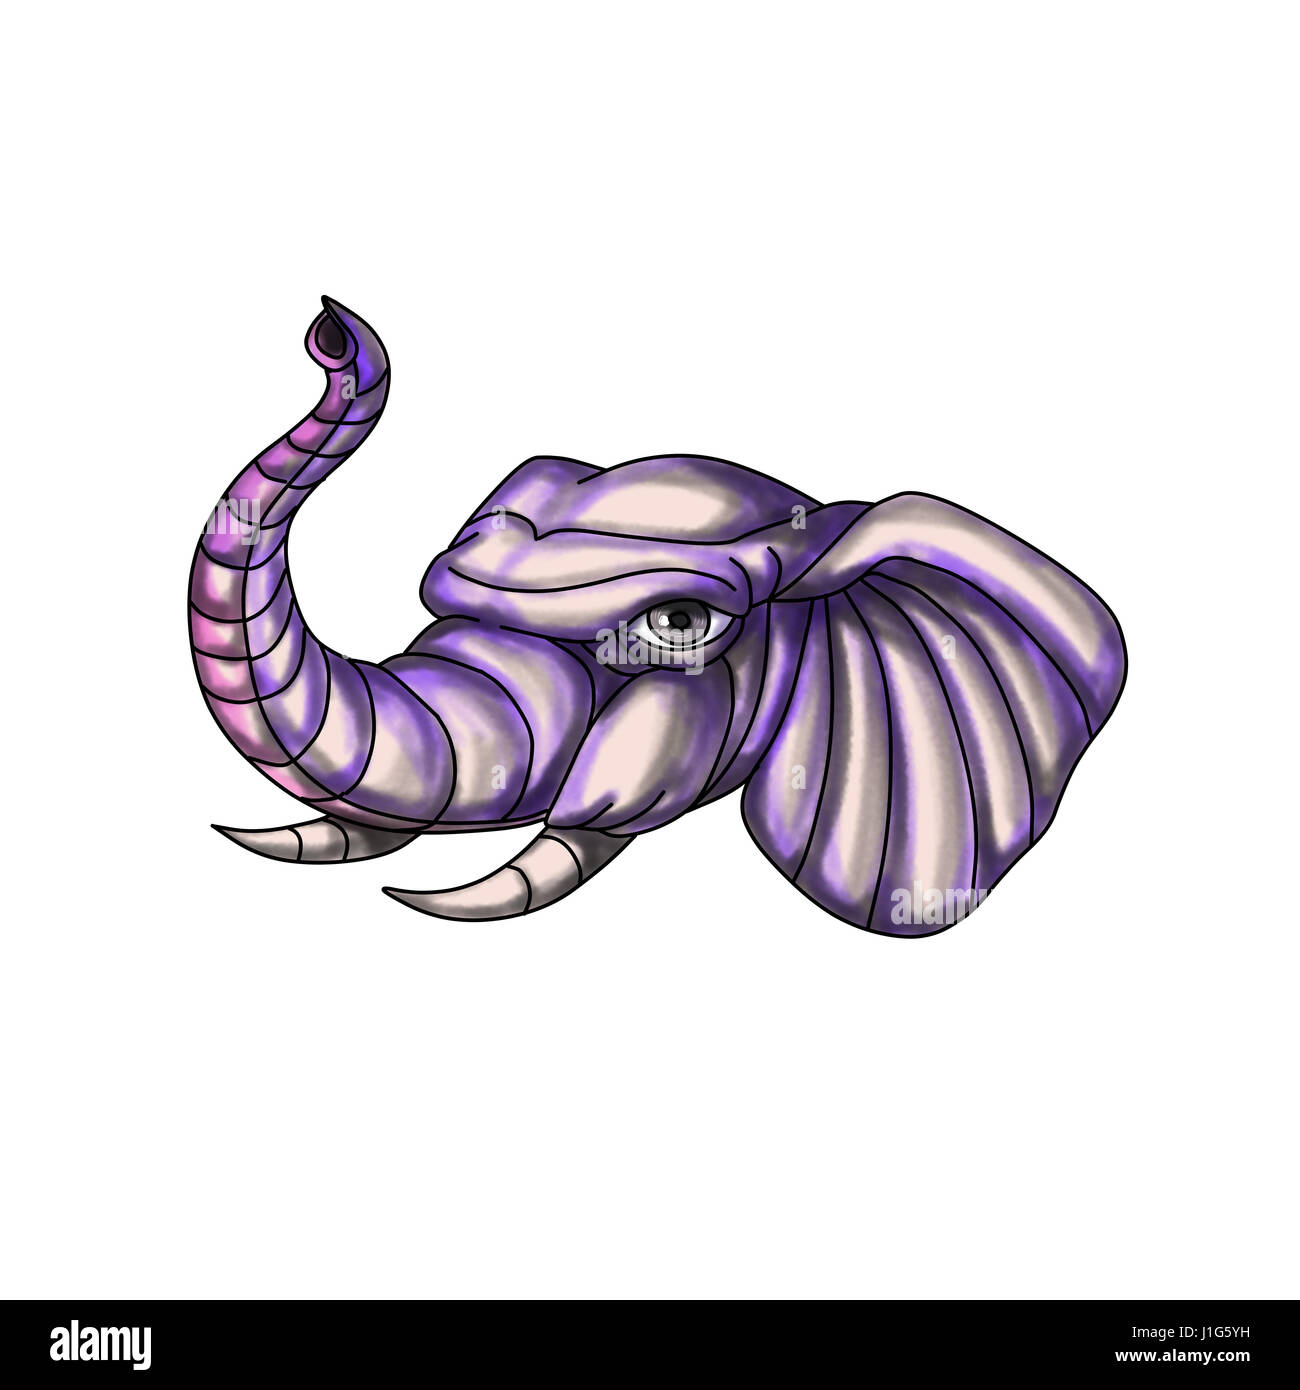 Tattoo style illustration of an elephant head with trunk raised up set on isolated white background. Stock Photo